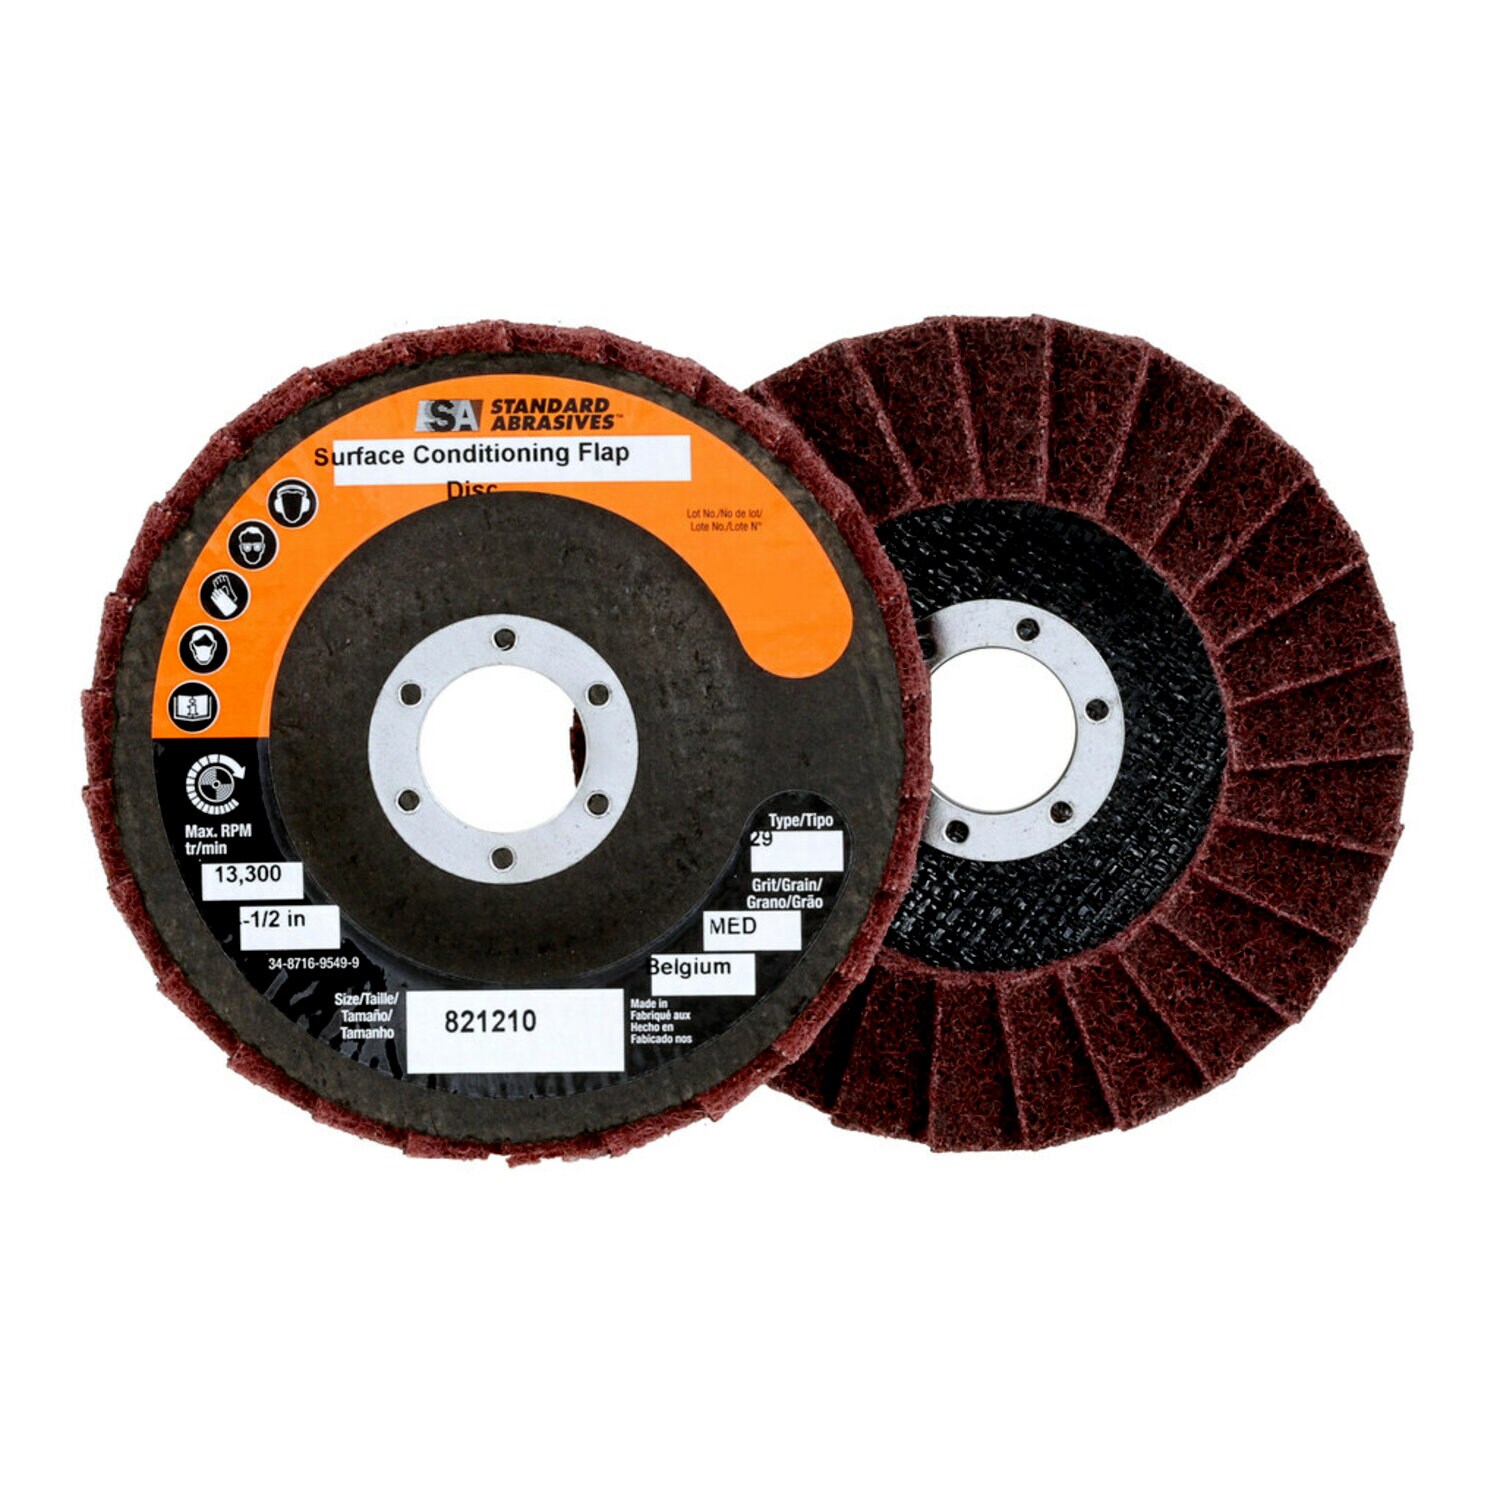 7000121834 - Standard Abrasives Surface Conditioning Flap Disc, 821210, 4-1/2 in x
7/8 in MED, 5/Carton, 50 ea/Case